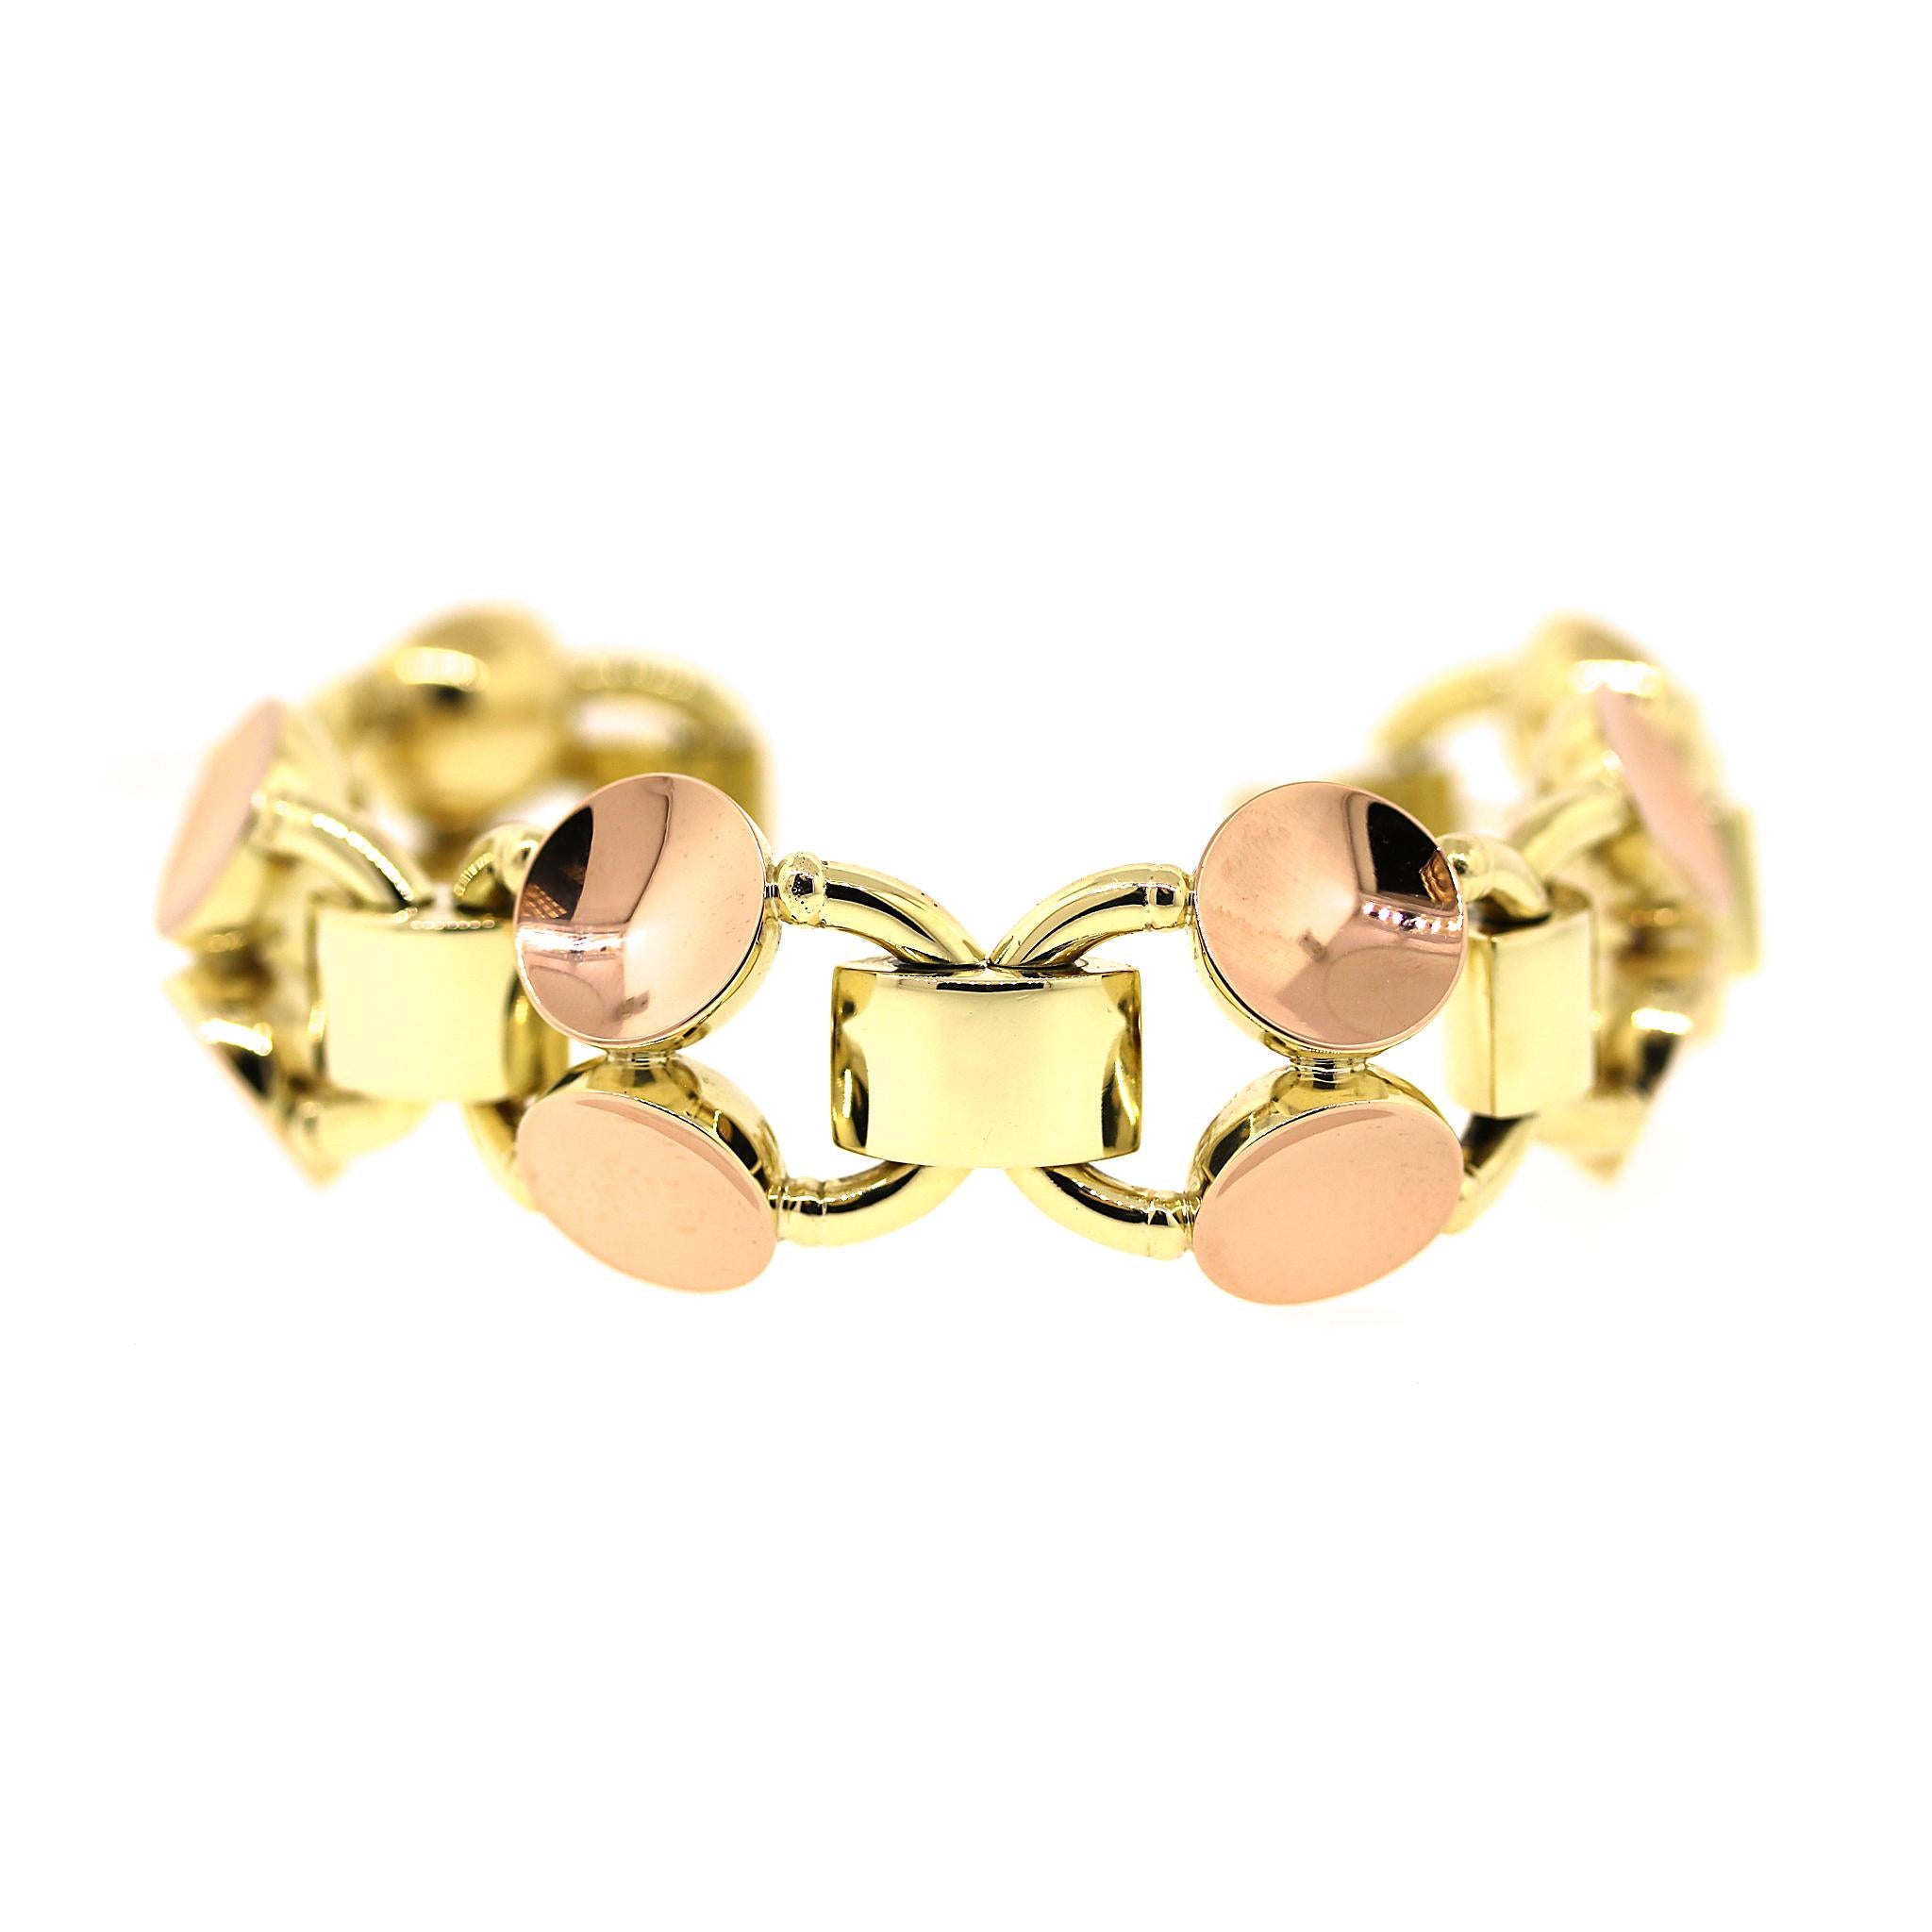 Retro Style 14kt Two-tone Gold Bracelet For Sale 3